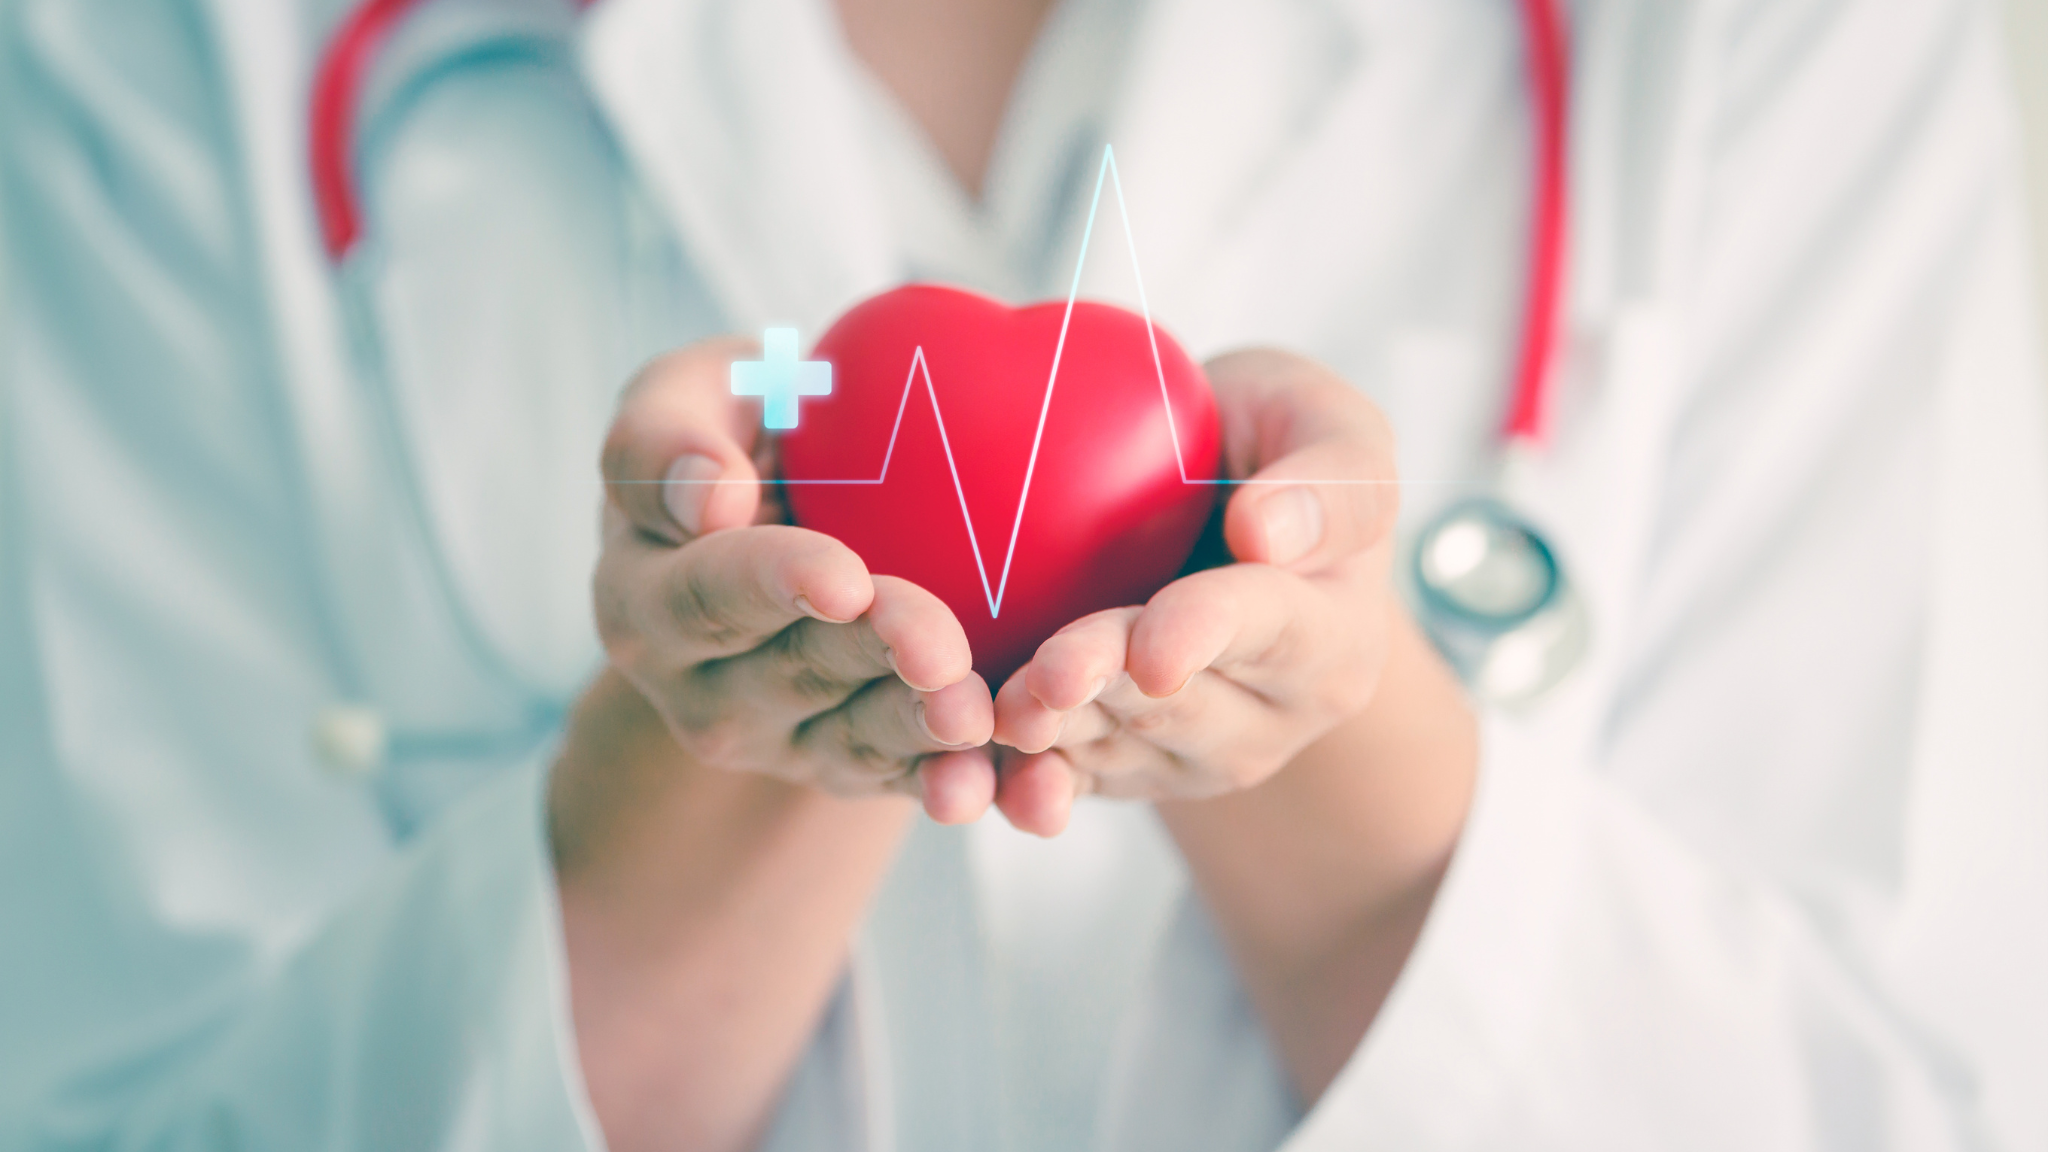 Can Heart Valve Problems Be Treated With Medication? | Options for Patients With Heart Disease